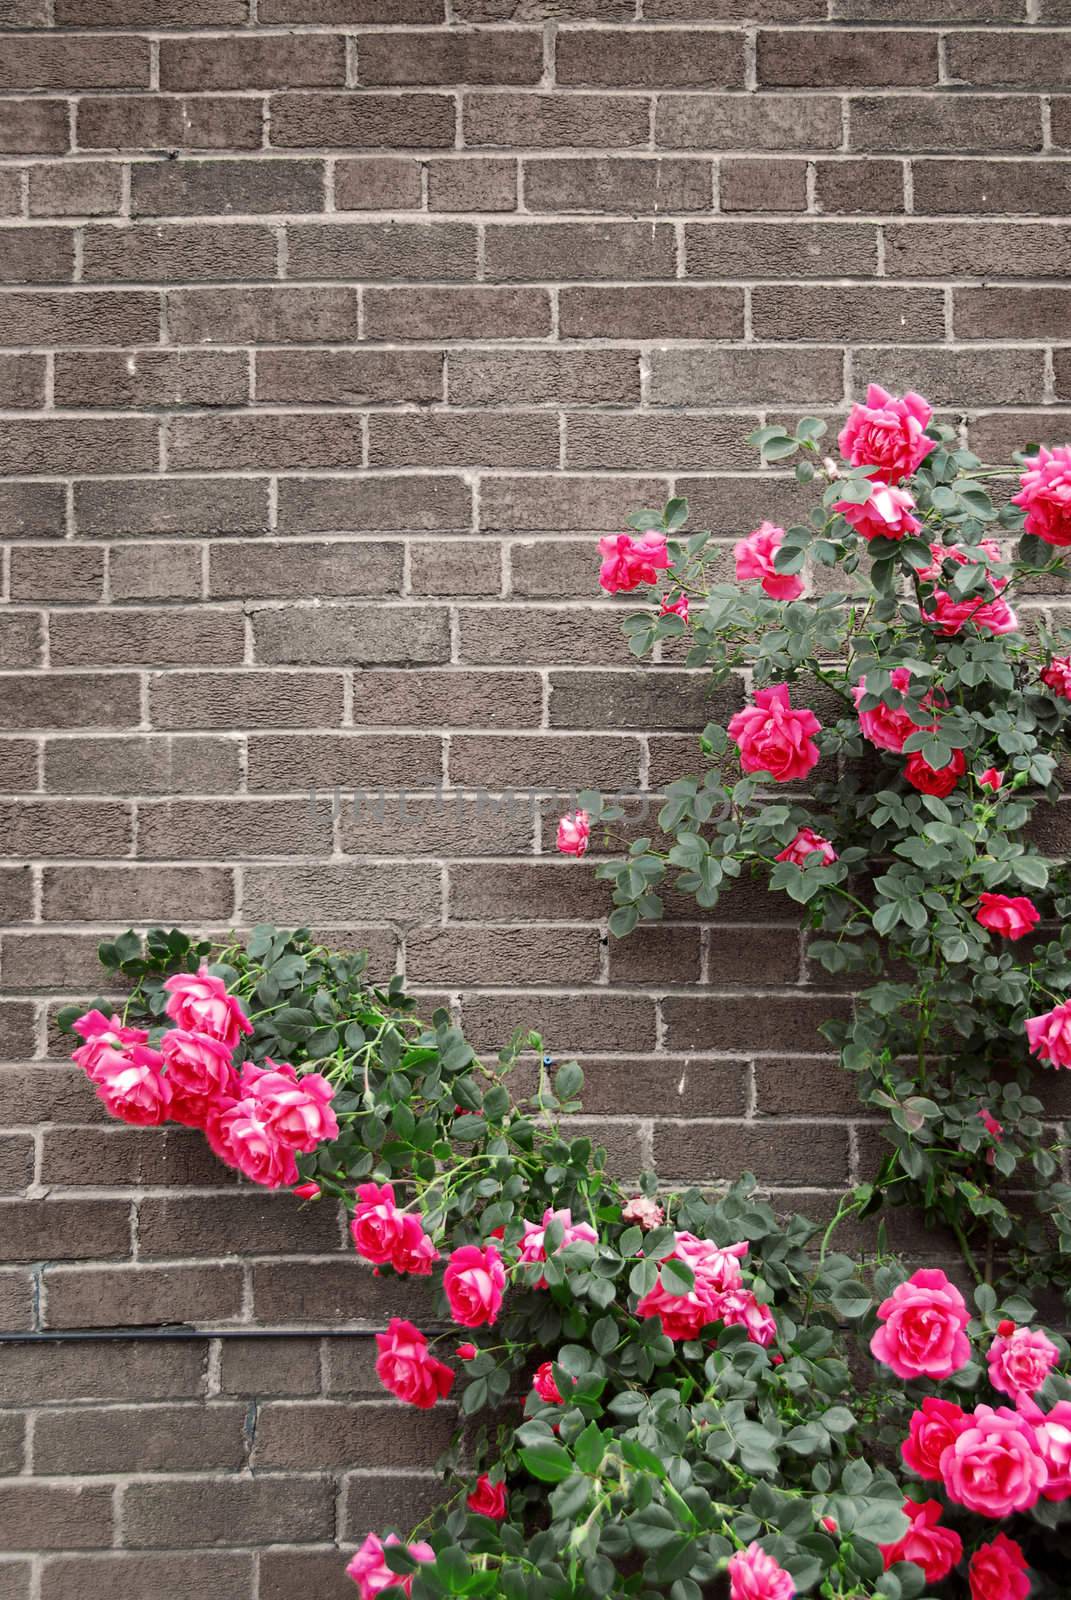 Roses on brick wall by elenathewise